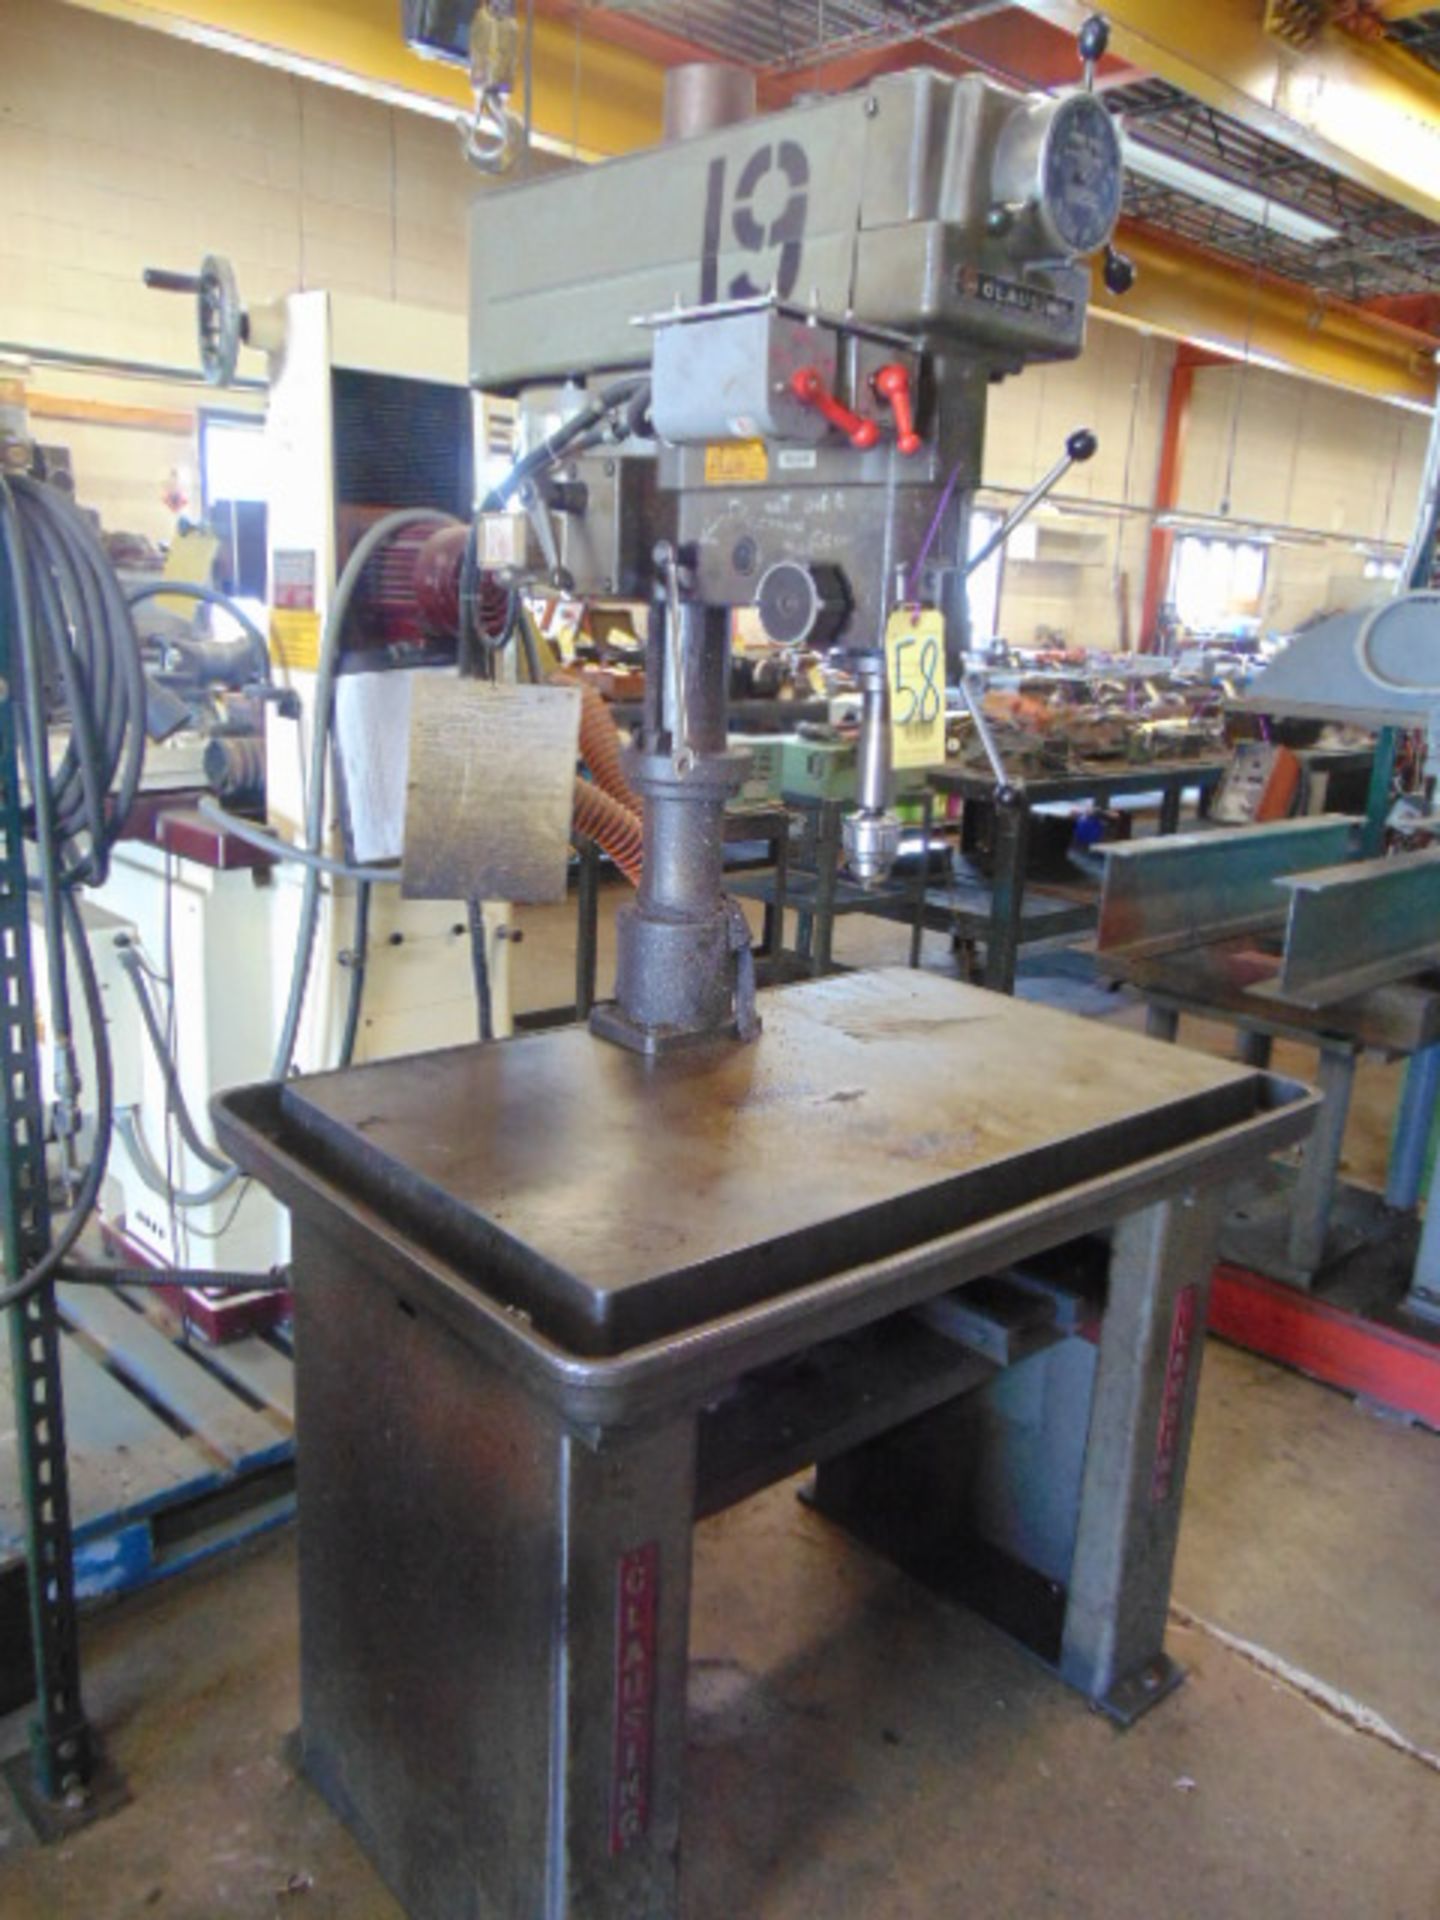 PRODUCTION DRILL, CLAUSING MDL. 2286, variable spd., oil groove table, S/N 525019 - Image 2 of 3